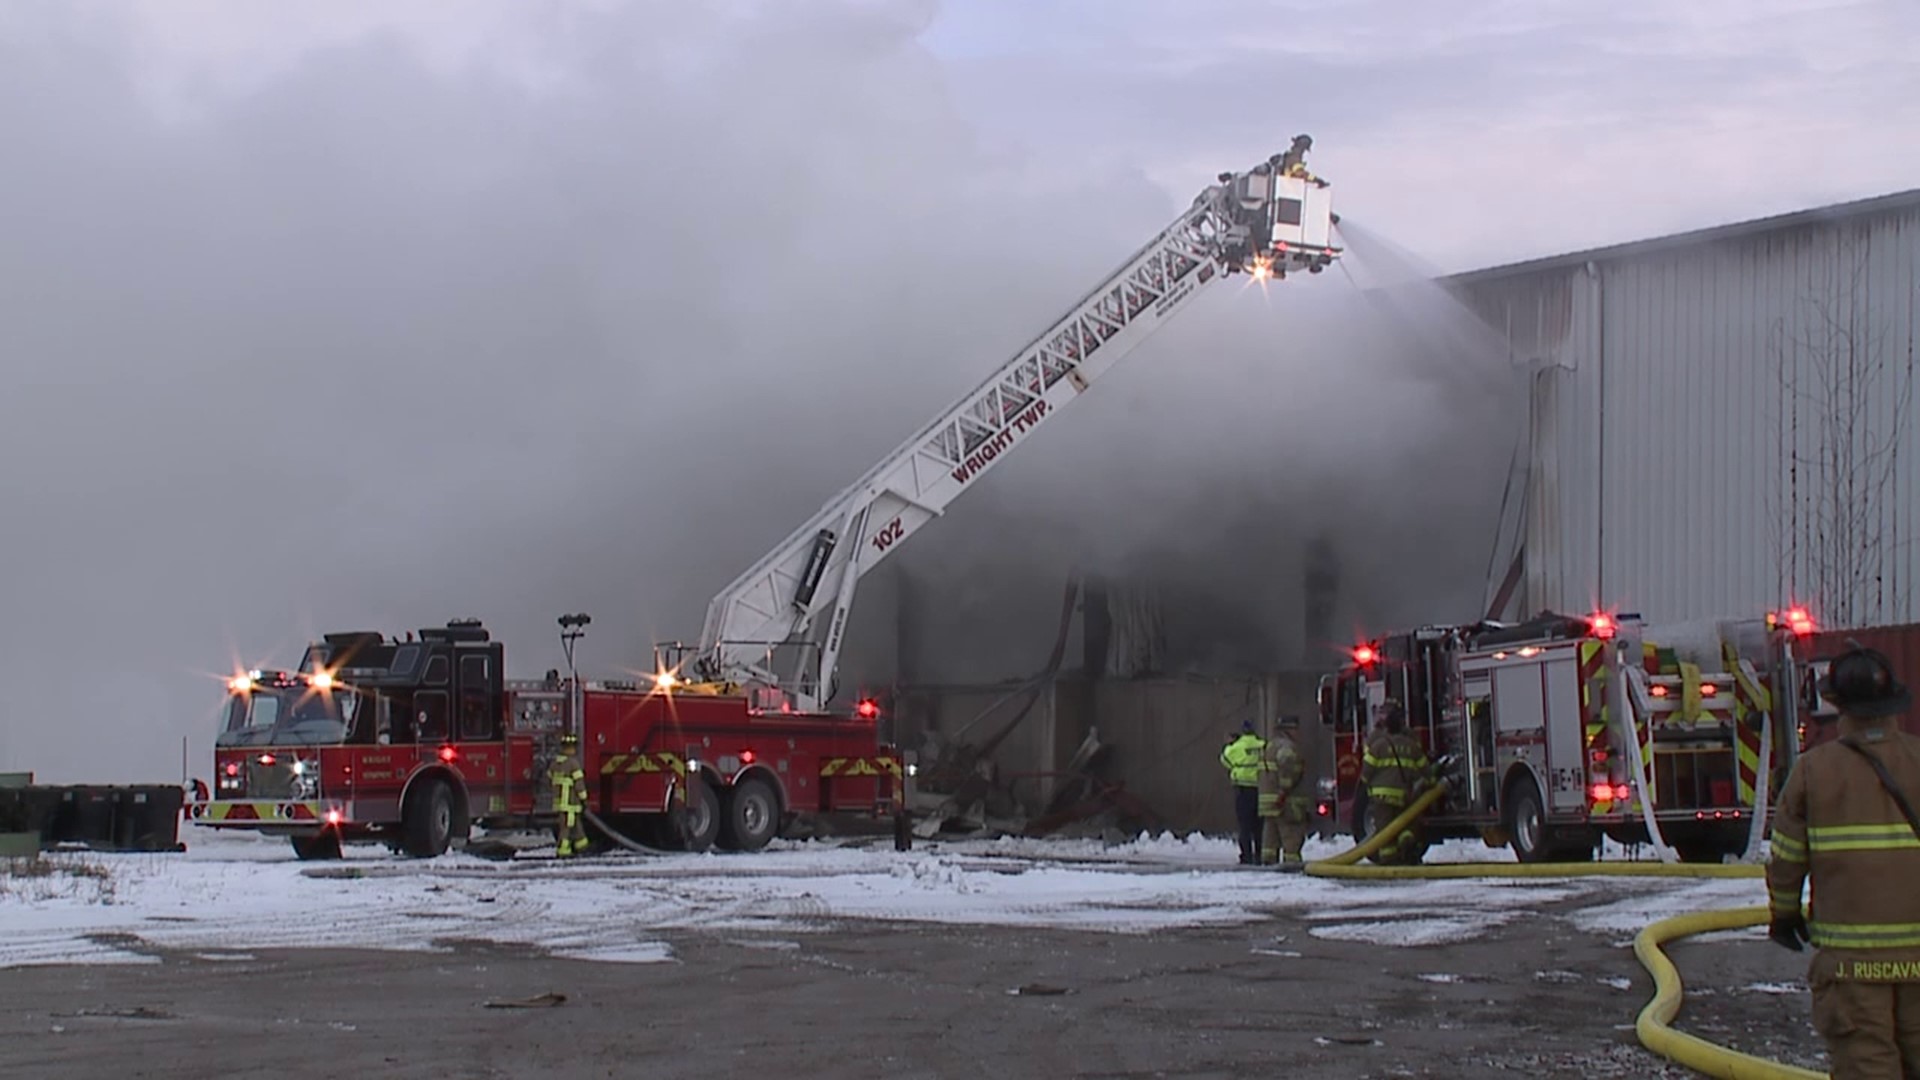 Flames broke out around 3 p.m. at Northeast Cartage Recycling Center in Hanover.